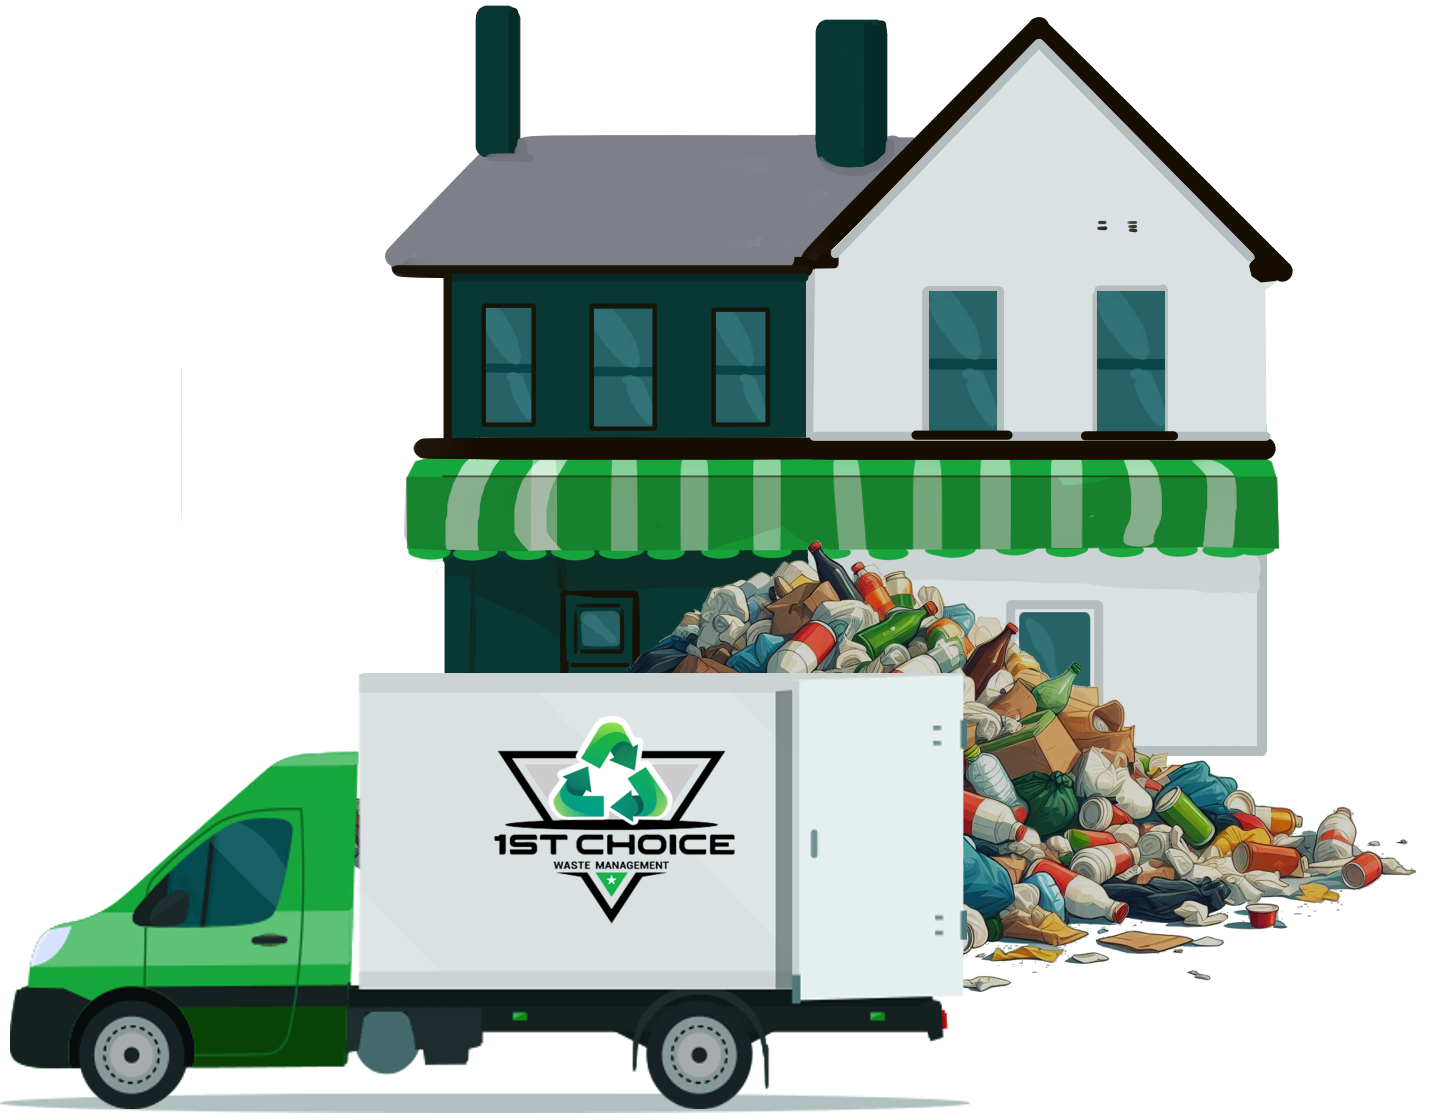 1st Choice provides Waste Collection -in Eastbourne